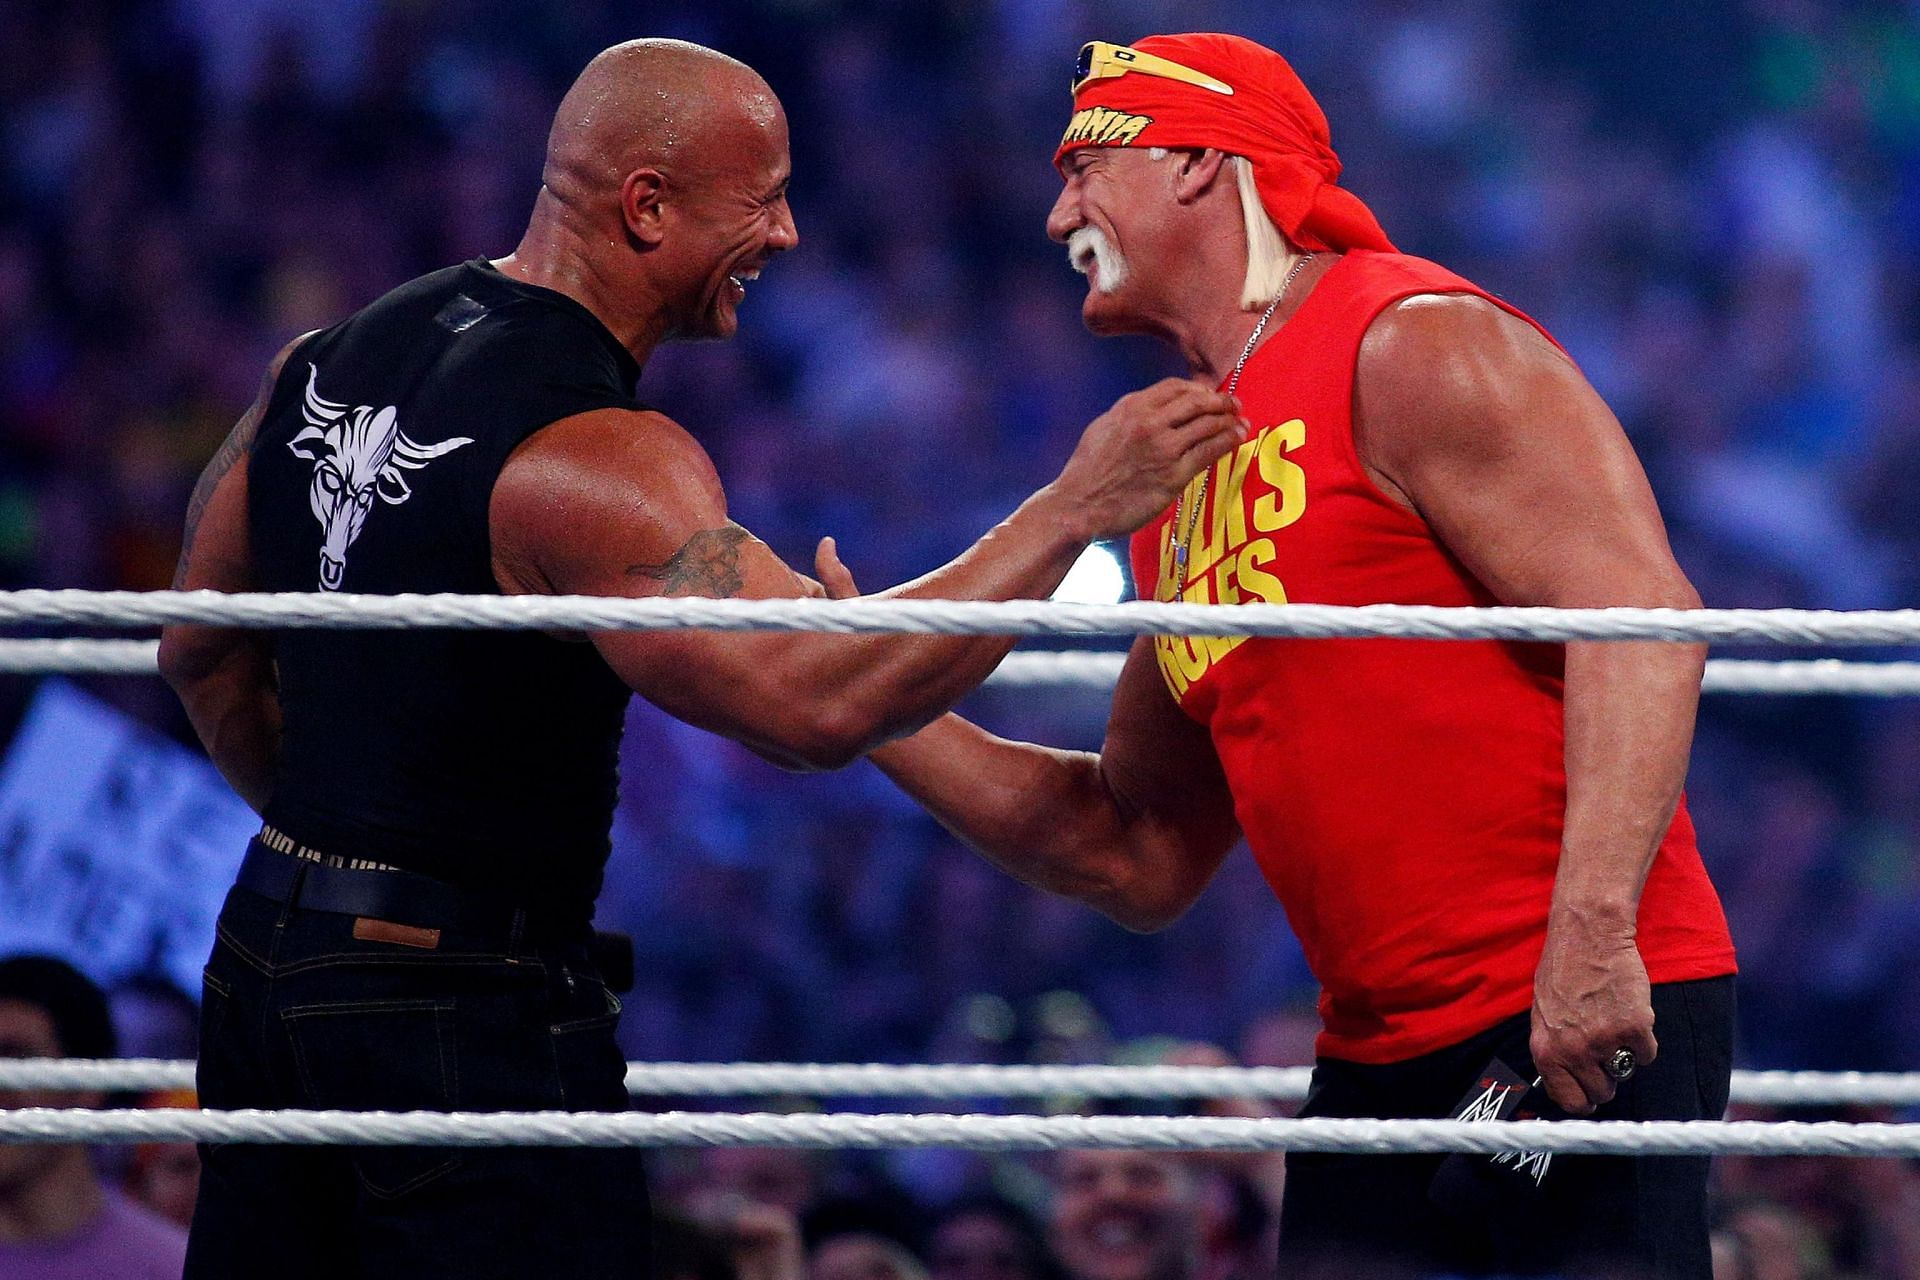 Hulk Hogan and The Rock have had an excellent relationship since the very beginning.